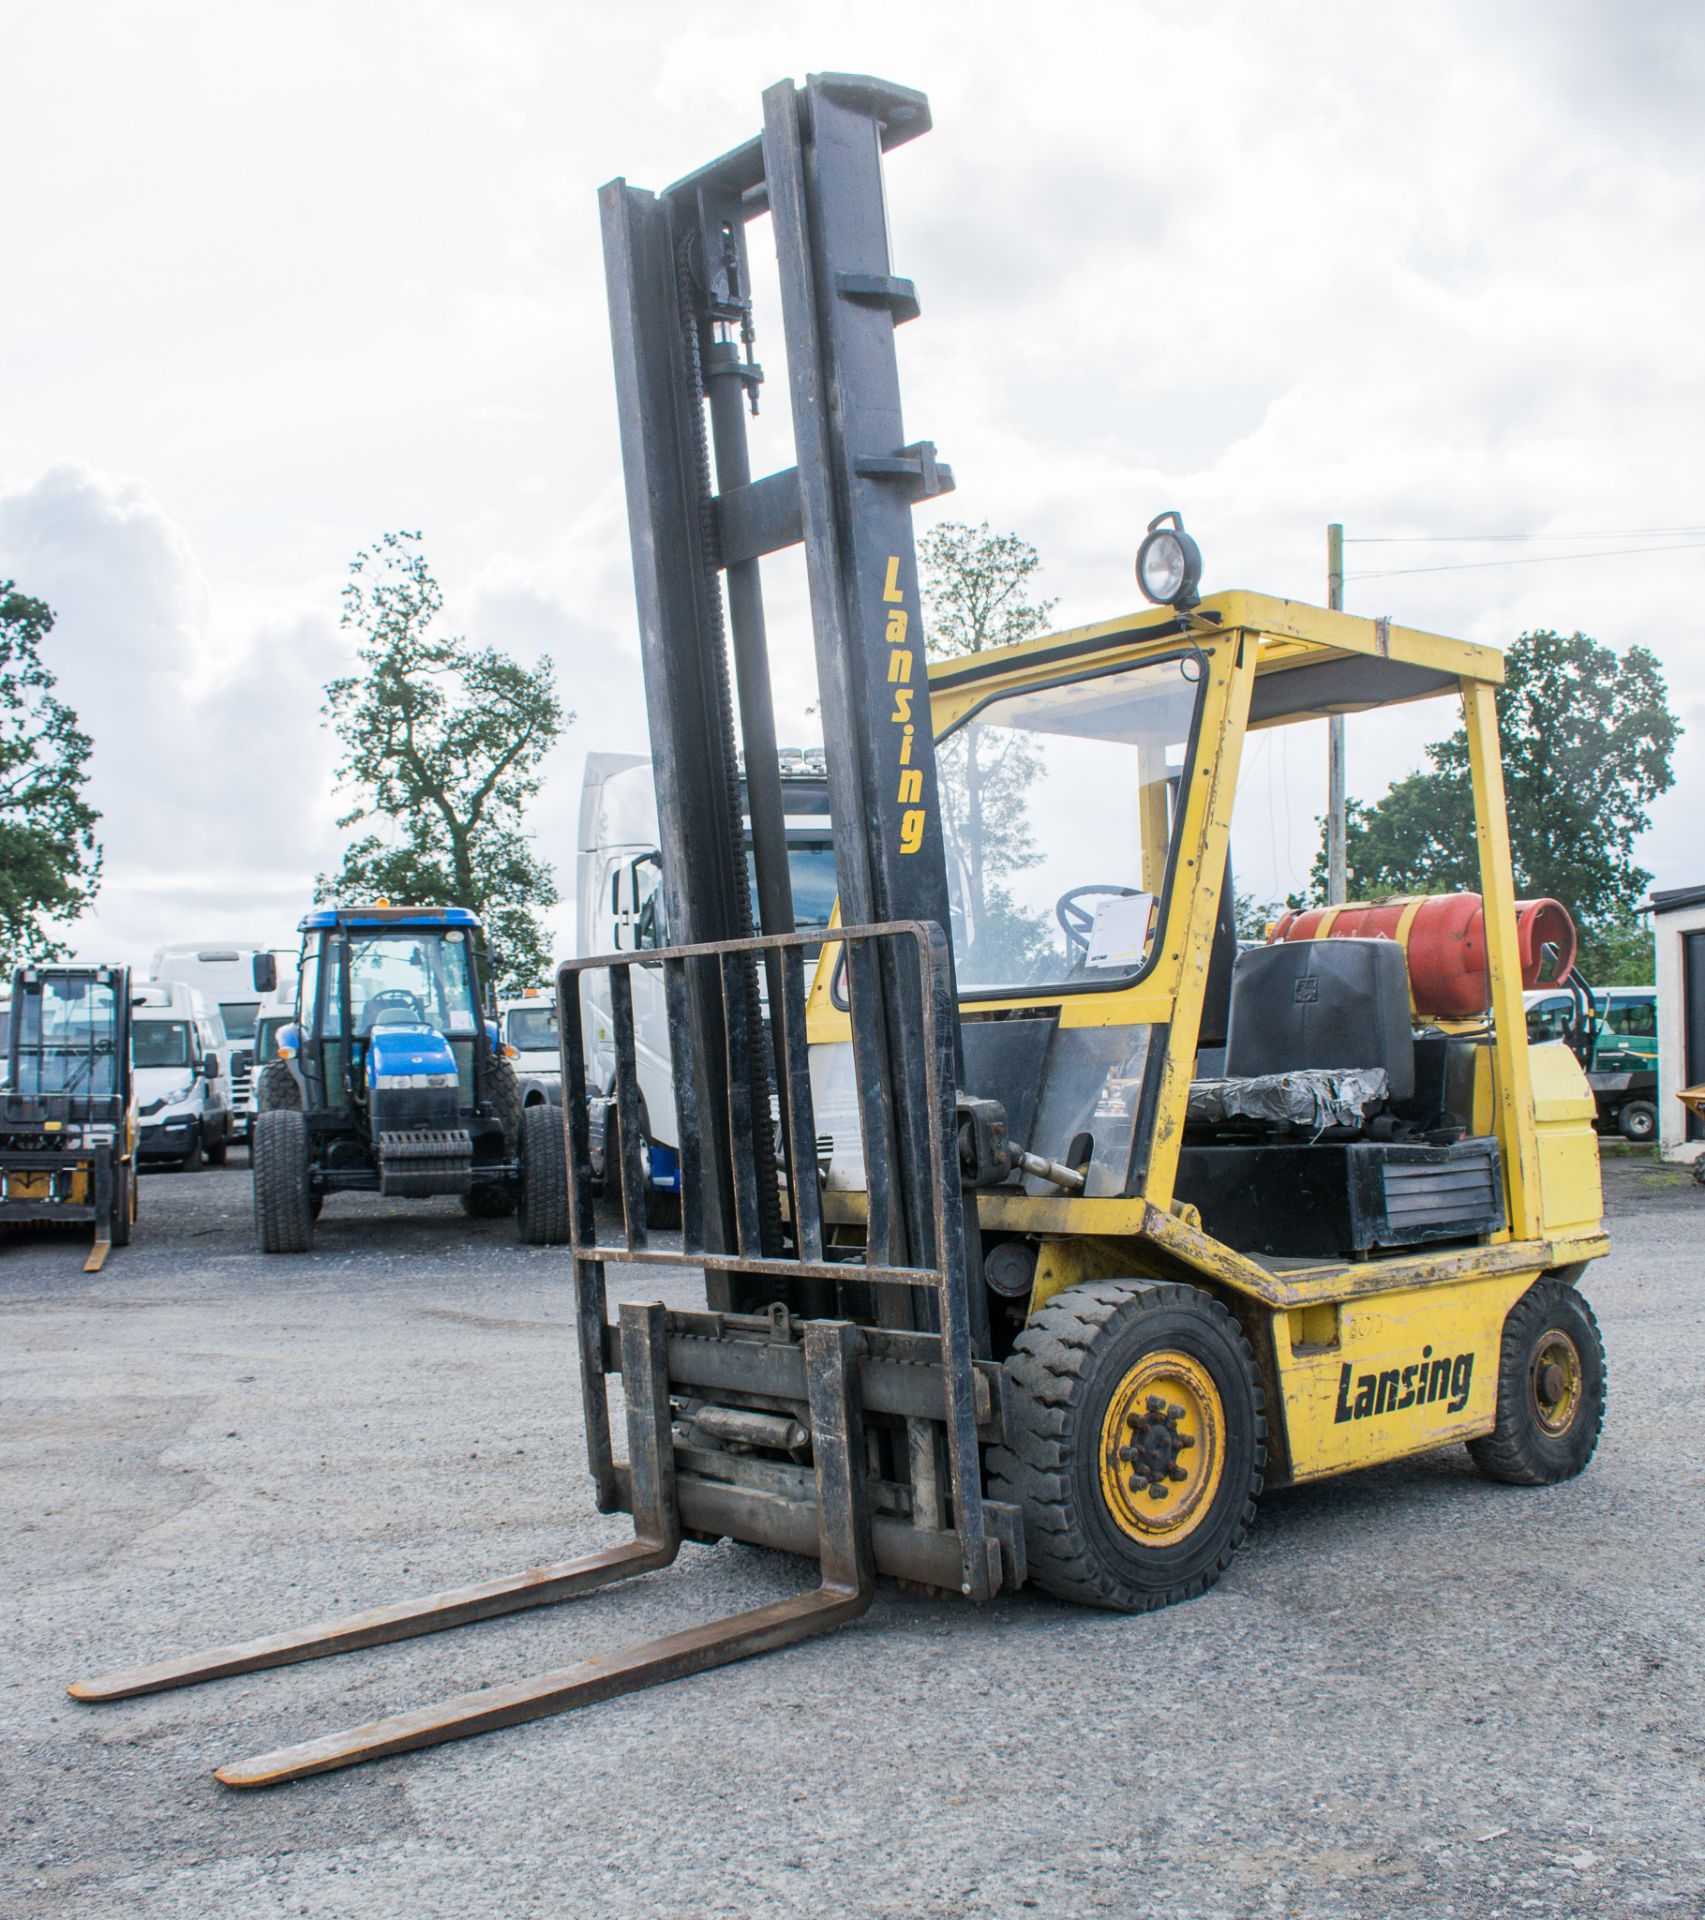 Lansing 7/2.5 2.5 tonne gas powered fork lift truck S/N: 36725 Recorded Hours: 219